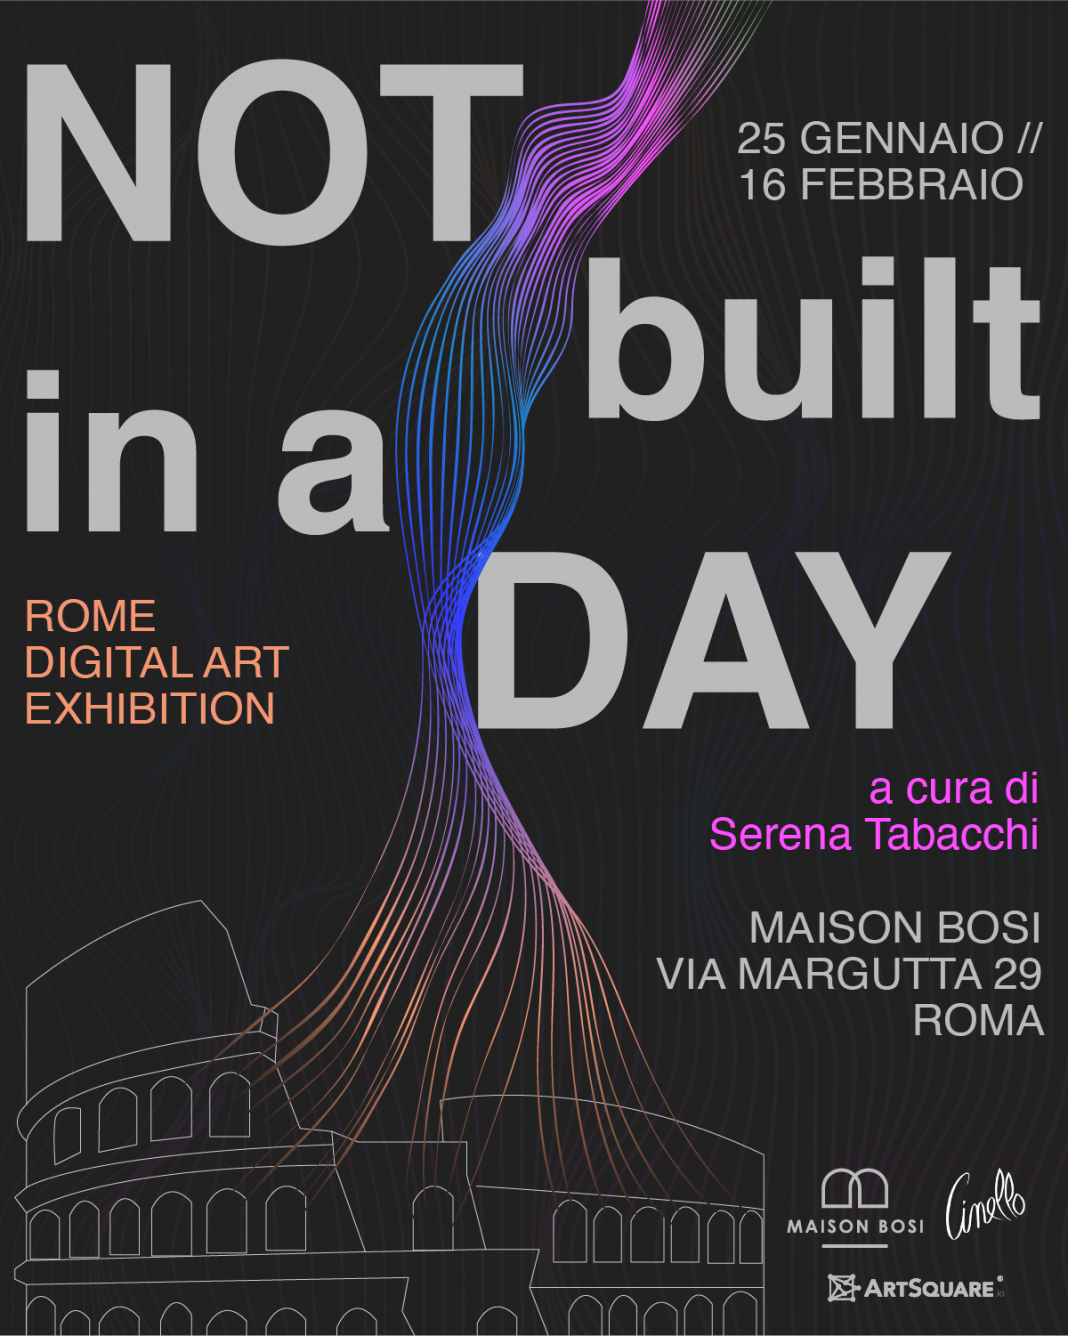 NOT BUILT IN A DAYhttps://www.exibart.com/repository/media/formidable/11/img/61a/Not-Built-in-a-Day_Locandina-DEF-1068x1336.png